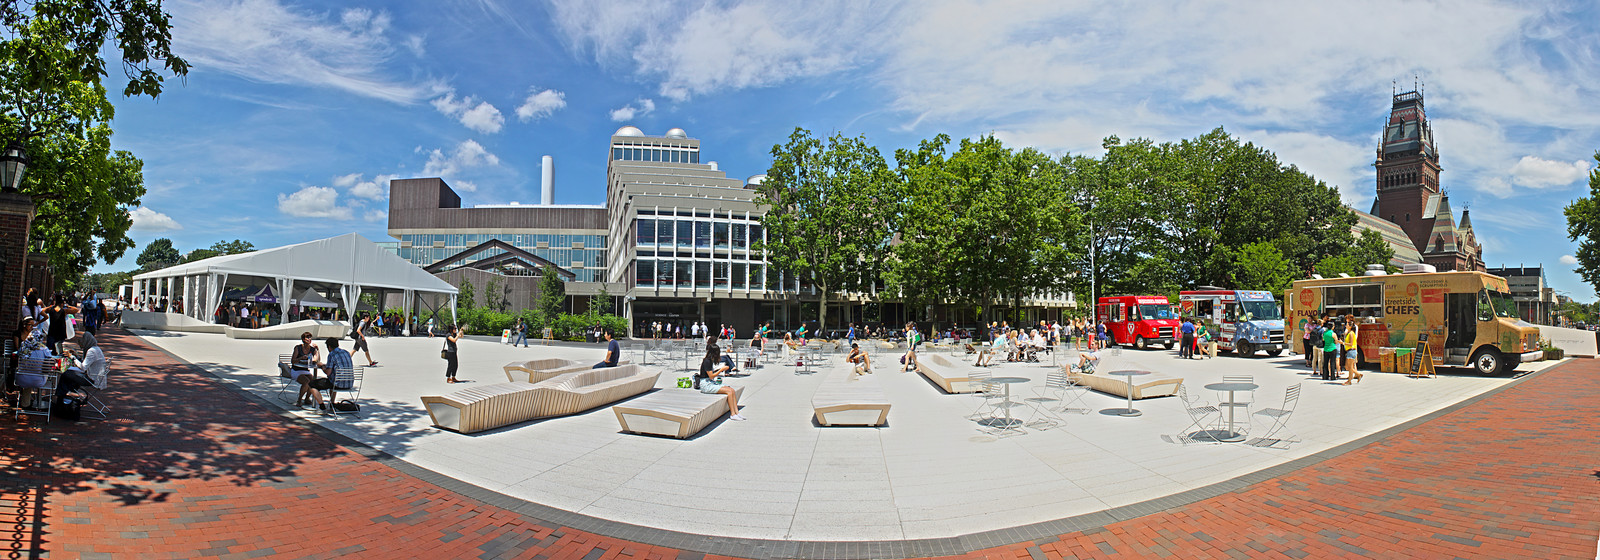 We built many of these wooden benches for Harvard University. The Plaza has grown into a real meeting area. We are proud to have our wood benches be the centerpiece of the Harvard University Plaza.